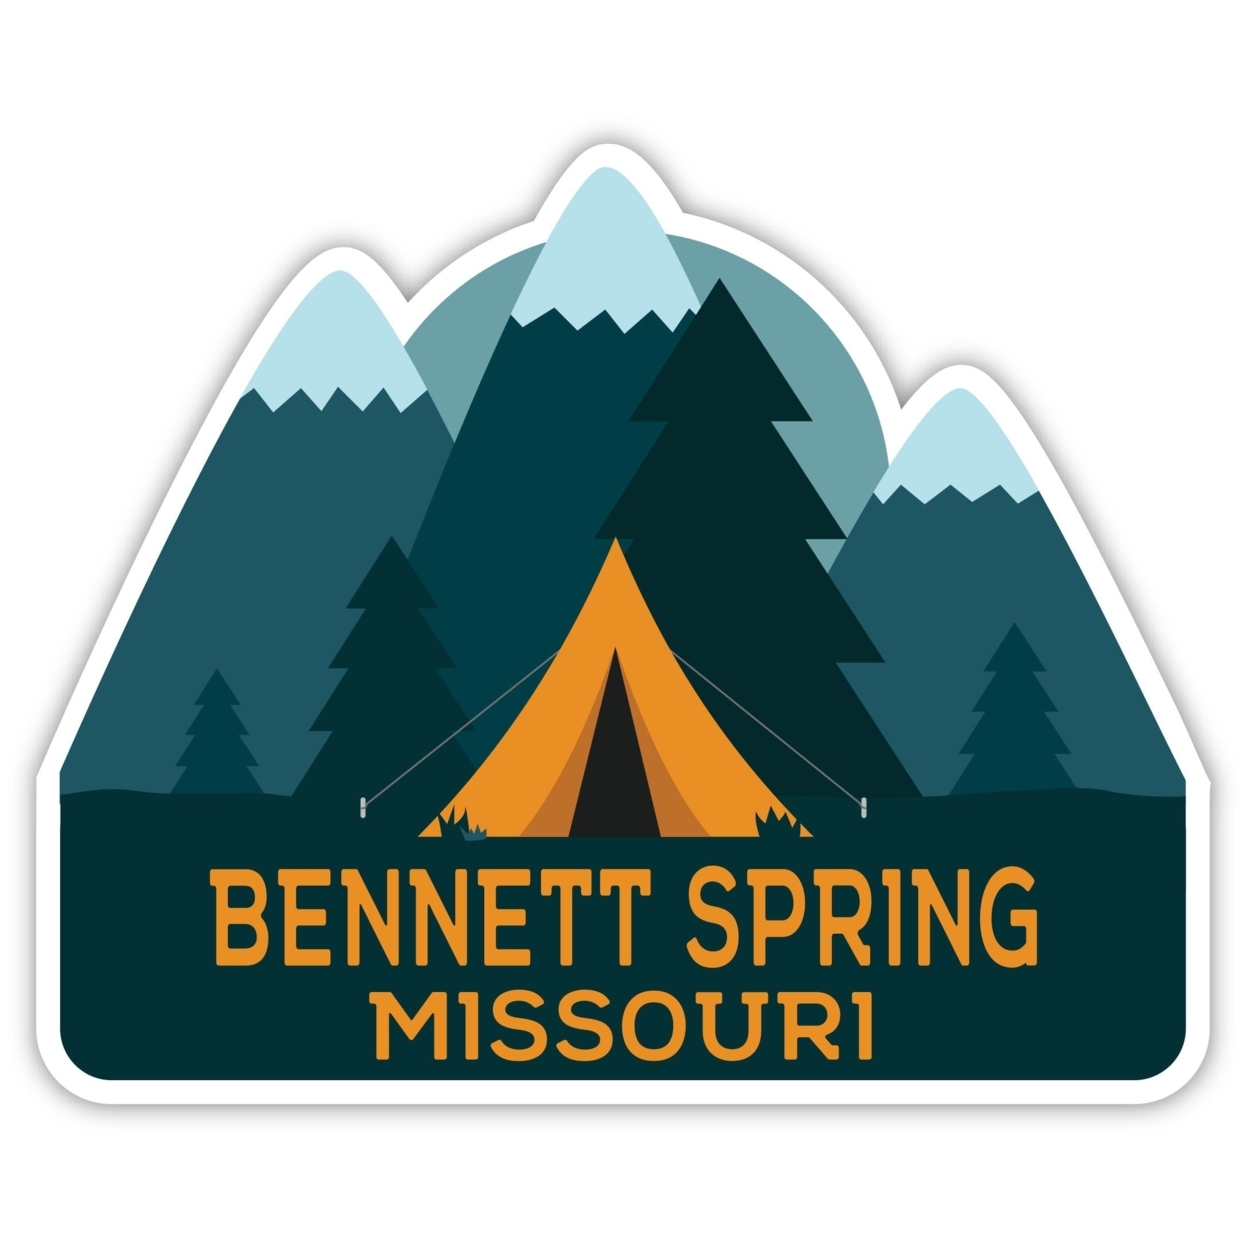 Bennett Spring Missouri Souvenir Decorative Stickers (Choose Theme And Size) - 4-Pack, 2-Inch, Tent